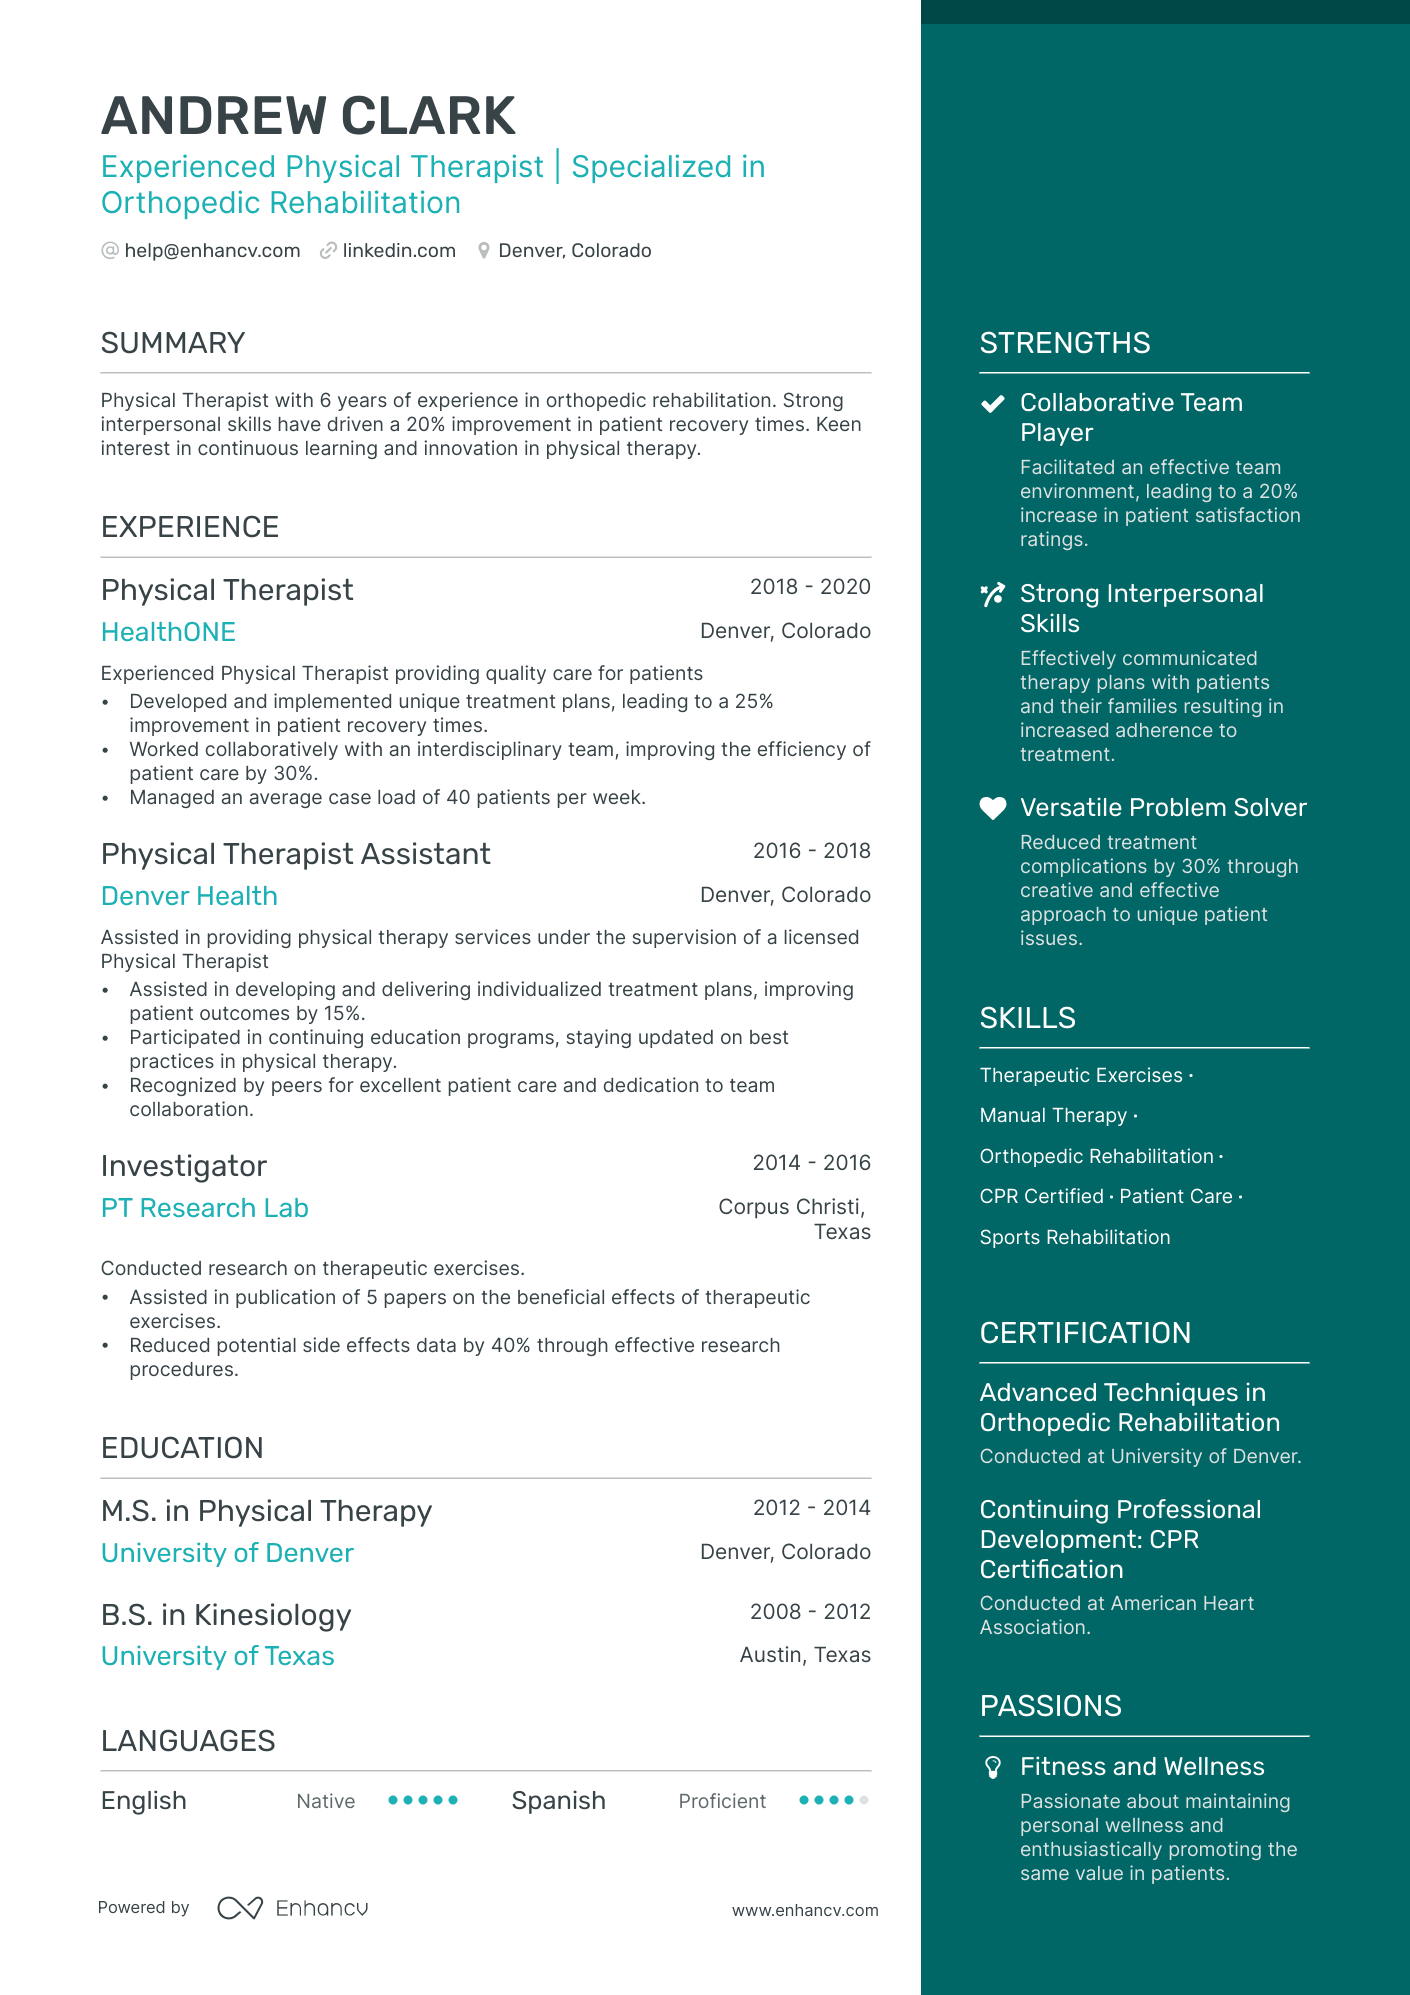 Physical Therapist Assistant resume example